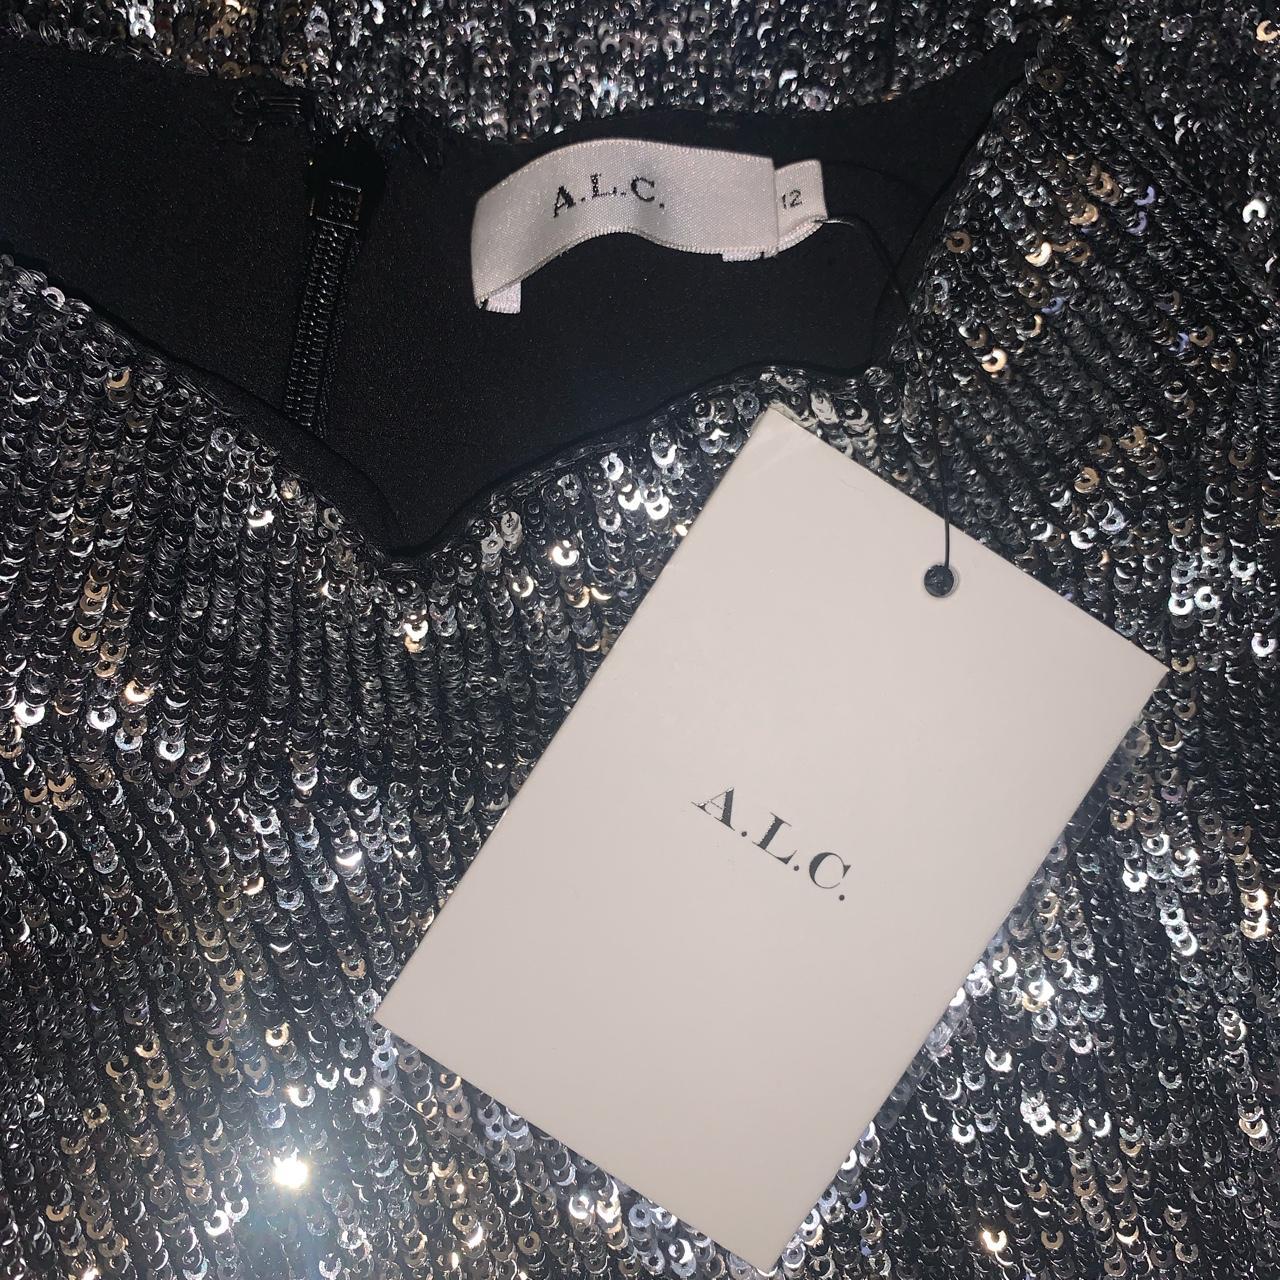 A.L.C Women's Silver and Black Blouse (4)